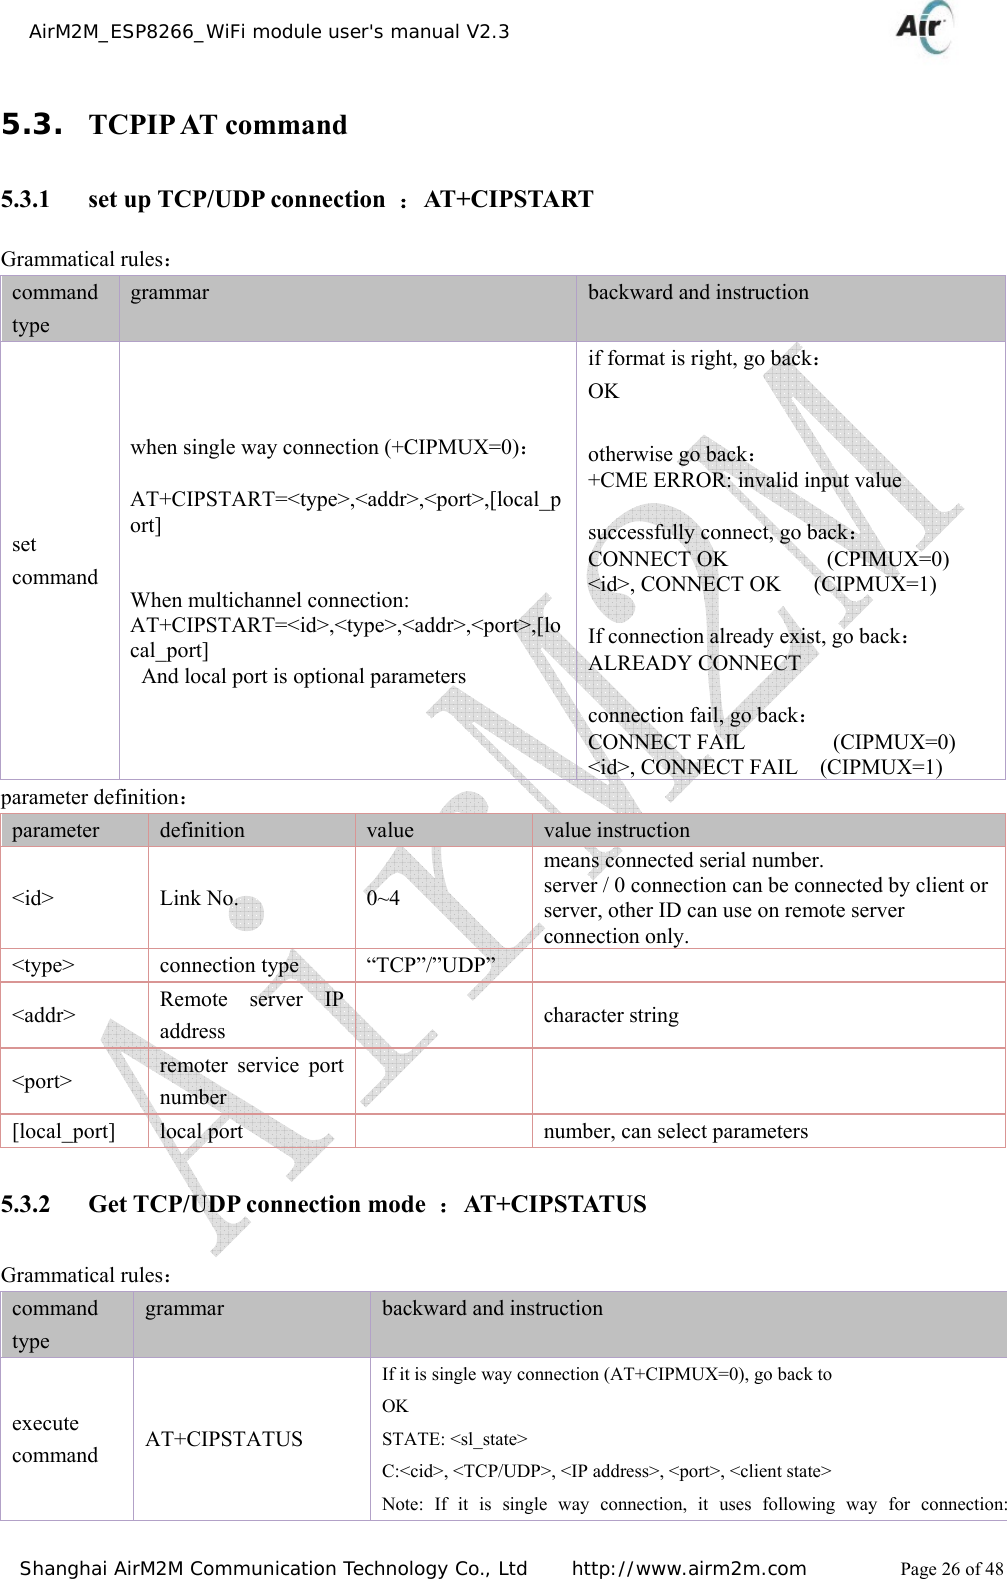    AirM2M_ESP8266_WiFi module user&apos;s manual V2.3   Shanghai AirM2M Communication Technology Co., Ltd     http://www.airm2m.com          Page 26 of 48 5.3. TCPIP AT command 5.3.1 set up TCP/UDP connection  ：AT+CIPSTART Grammatical rules： command type grammar  backward and instruction set command when single way connection (+CIPMUX=0)：  AT+CIPSTART=&lt;type&gt;,&lt;addr&gt;,&lt;port&gt;,[local_port]   When multichannel connection: AT+CIPSTART=&lt;id&gt;,&lt;type&gt;,&lt;addr&gt;,&lt;port&gt;,[local_port] And local port is optional parameters if format is right, go back： OK  otherwise go back： +CME ERROR: invalid input value  successfully connect, go back： CONNECT OK         (CPIMUX=0) &lt;id&gt;, CONNECT OK      (CIPMUX=1)  If connection already exist, go back： ALREADY CONNECT  connection fail, go back： CONNECT FAIL        (CIPMUX=0) &lt;id&gt;, CONNECT FAIL    (CIPMUX=1) parameter definition： parameter  definition  value  value instruction &lt;id&gt; Link No.  0~4 means connected serial number. server / 0 connection can be connected by client or server, other ID can use on remote server connection only. &lt;type&gt; connection type “TCP”/”UDP”  &lt;addr&gt;  Remote server IP address   character string &lt;port&gt;  remoter service port number    [local_port]  local port    number, can select parameters 5.3.2 Get TCP/UDP connection mode  ：AT+CIPSTATUS Grammatical rules： command type grammar  backward and instruction execute command  AT+CIPSTATUS If it is single way connection (AT+CIPMUX=0), go back to OK STATE: &lt;sl_state&gt; C:&lt;cid&gt;, &lt;TCP/UDP&gt;, &lt;IP address&gt;, &lt;port&gt;, &lt;client state&gt; Note: If it is single way connection, it uses following way for connection: 